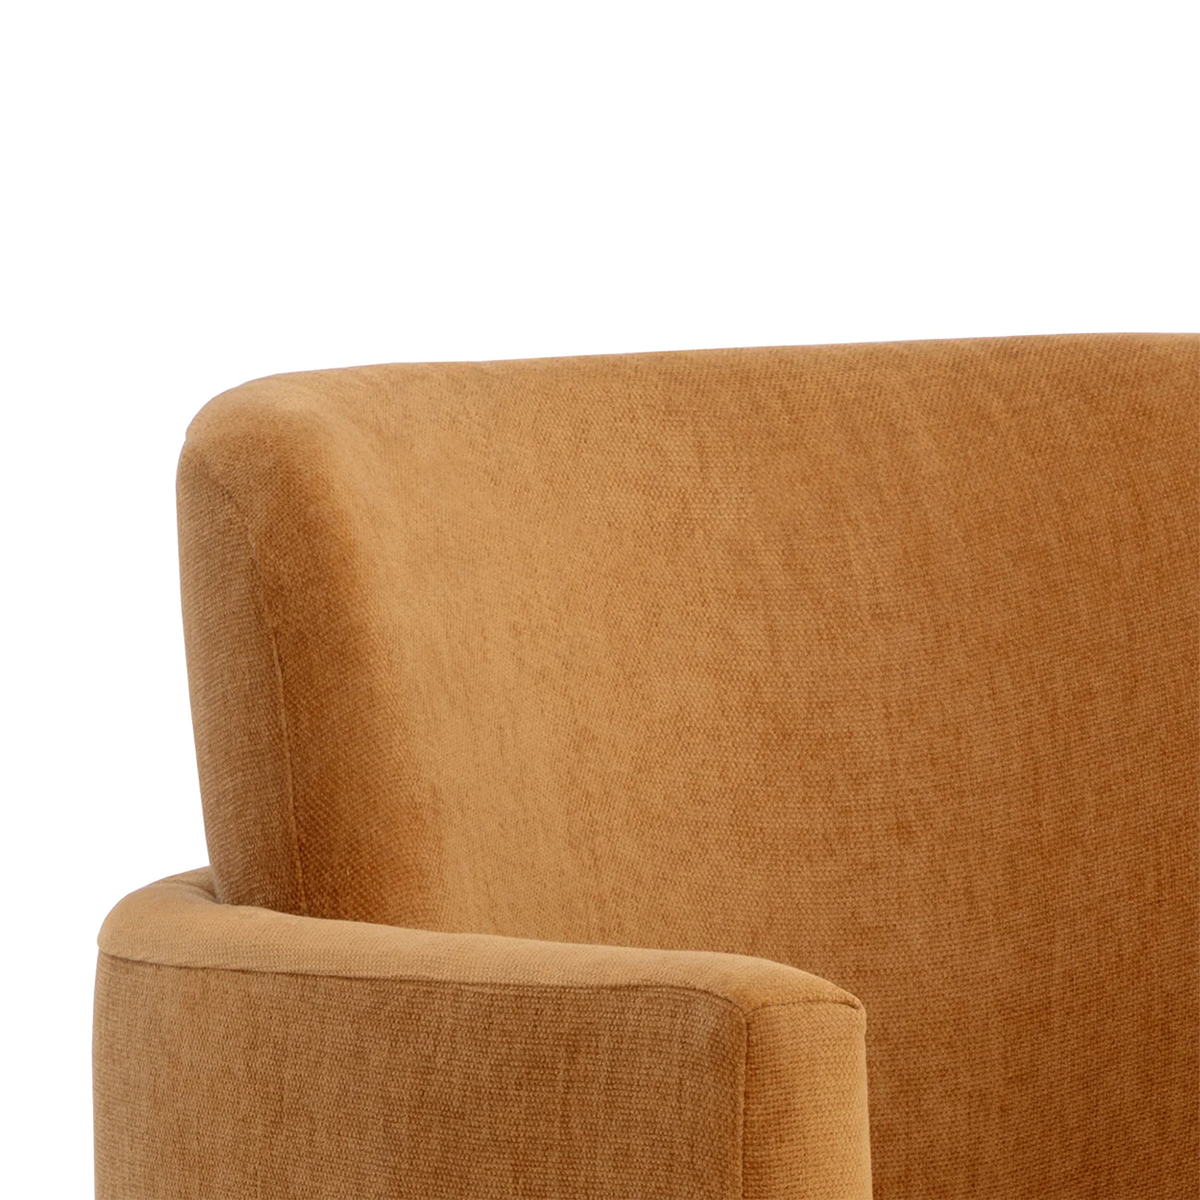 richie dining armchair orange close image of the material